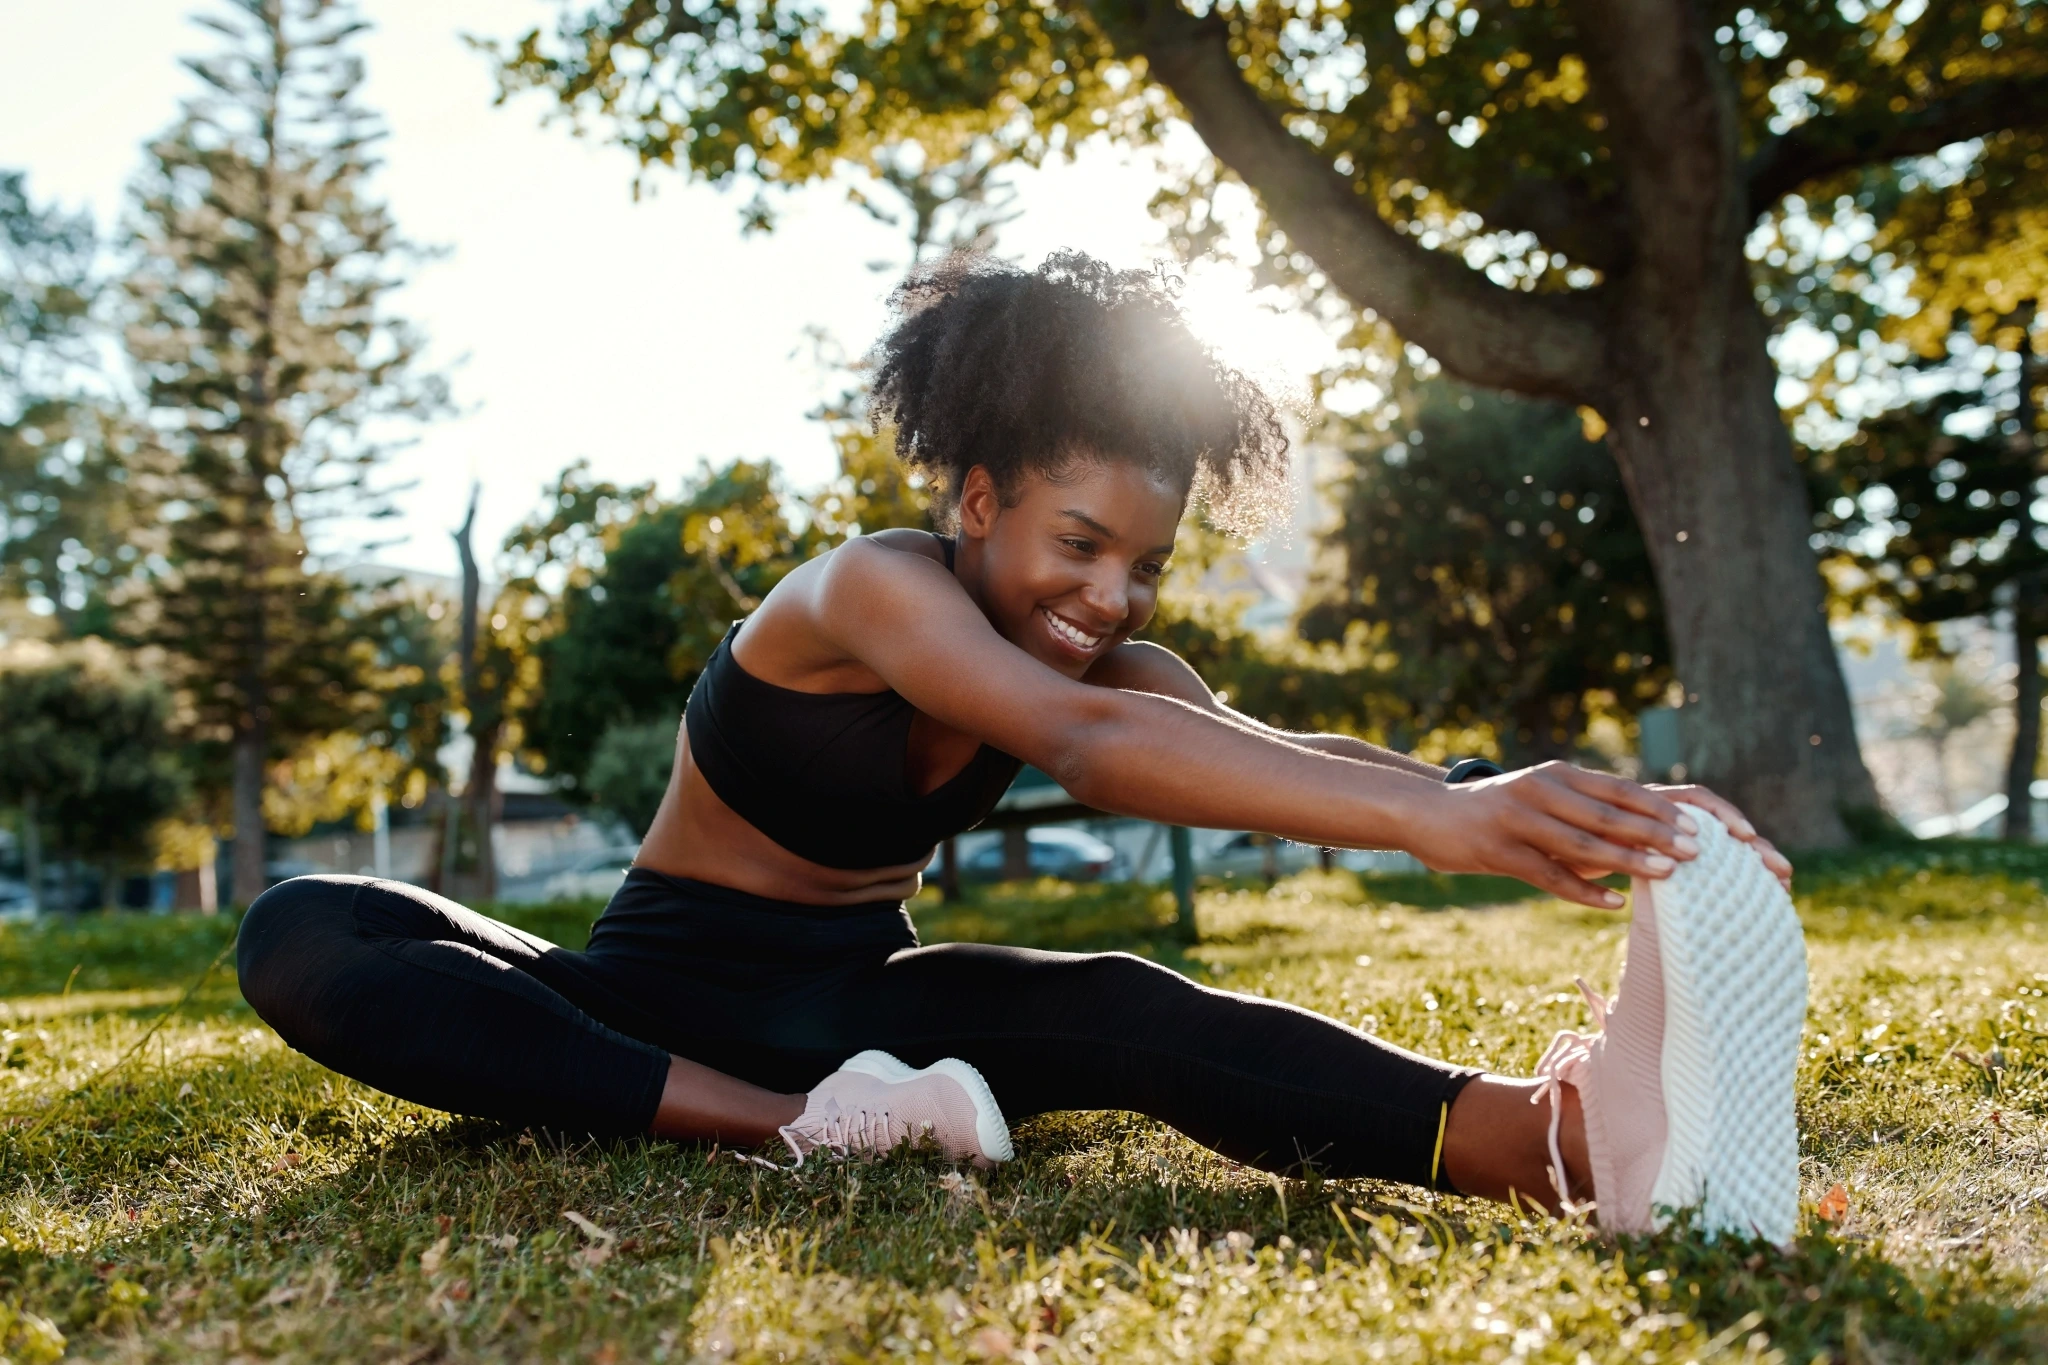 a woman stretches her hamstring while seated in an outdoor setting